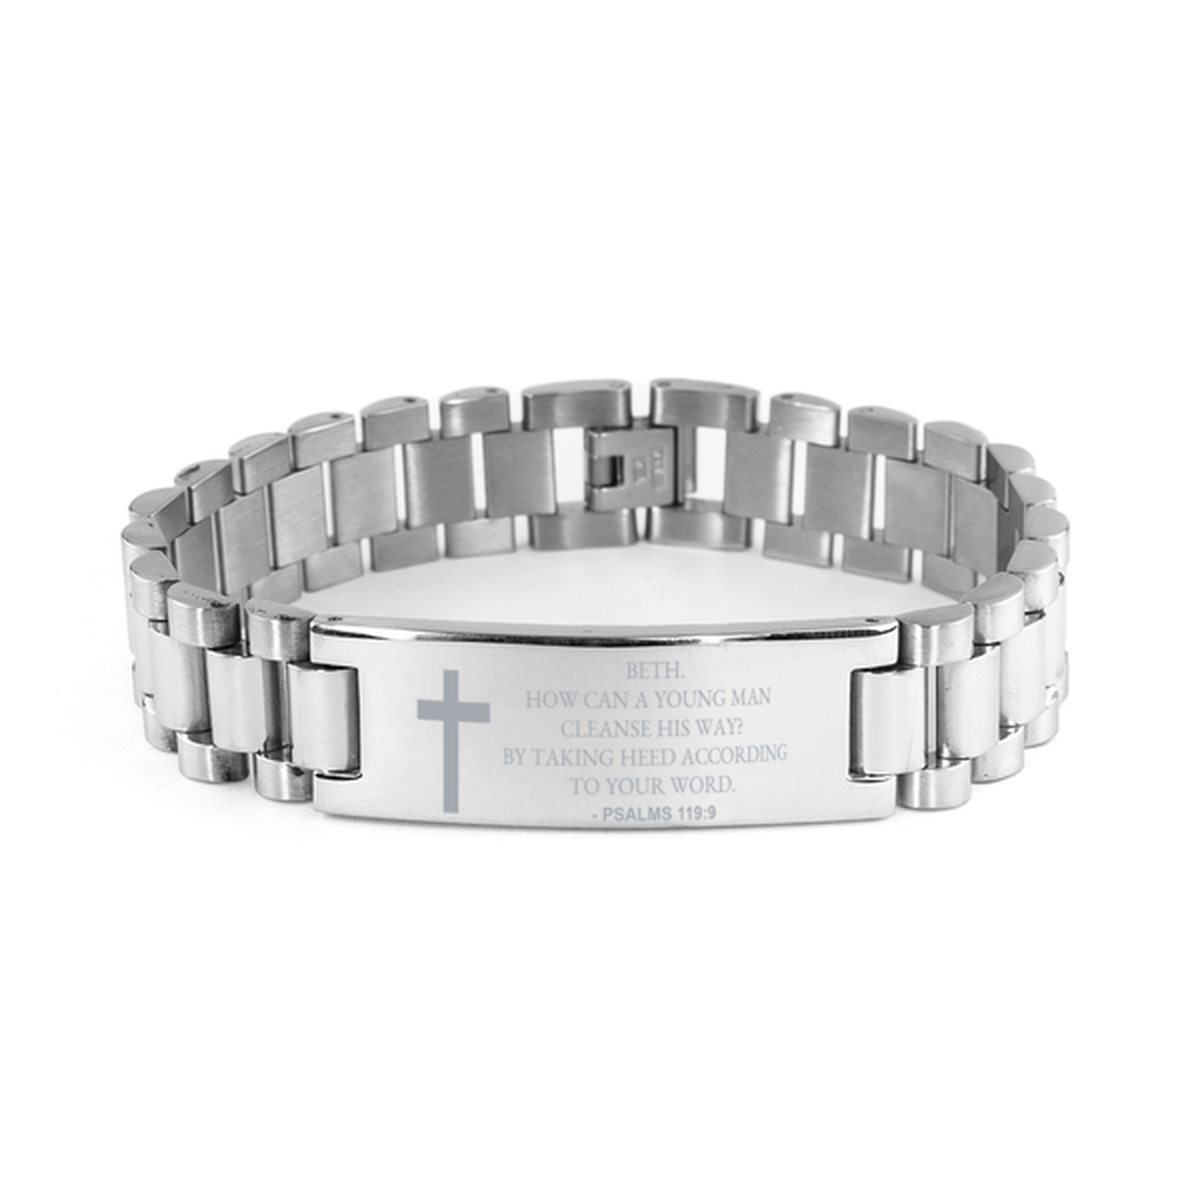 Christian Ladder Stainless Steel Bracelet, Psalms 119:9 Beth. How Can A Young Man Cleanse His Way? By, Motivational Bible Verse Gifts For Men Women